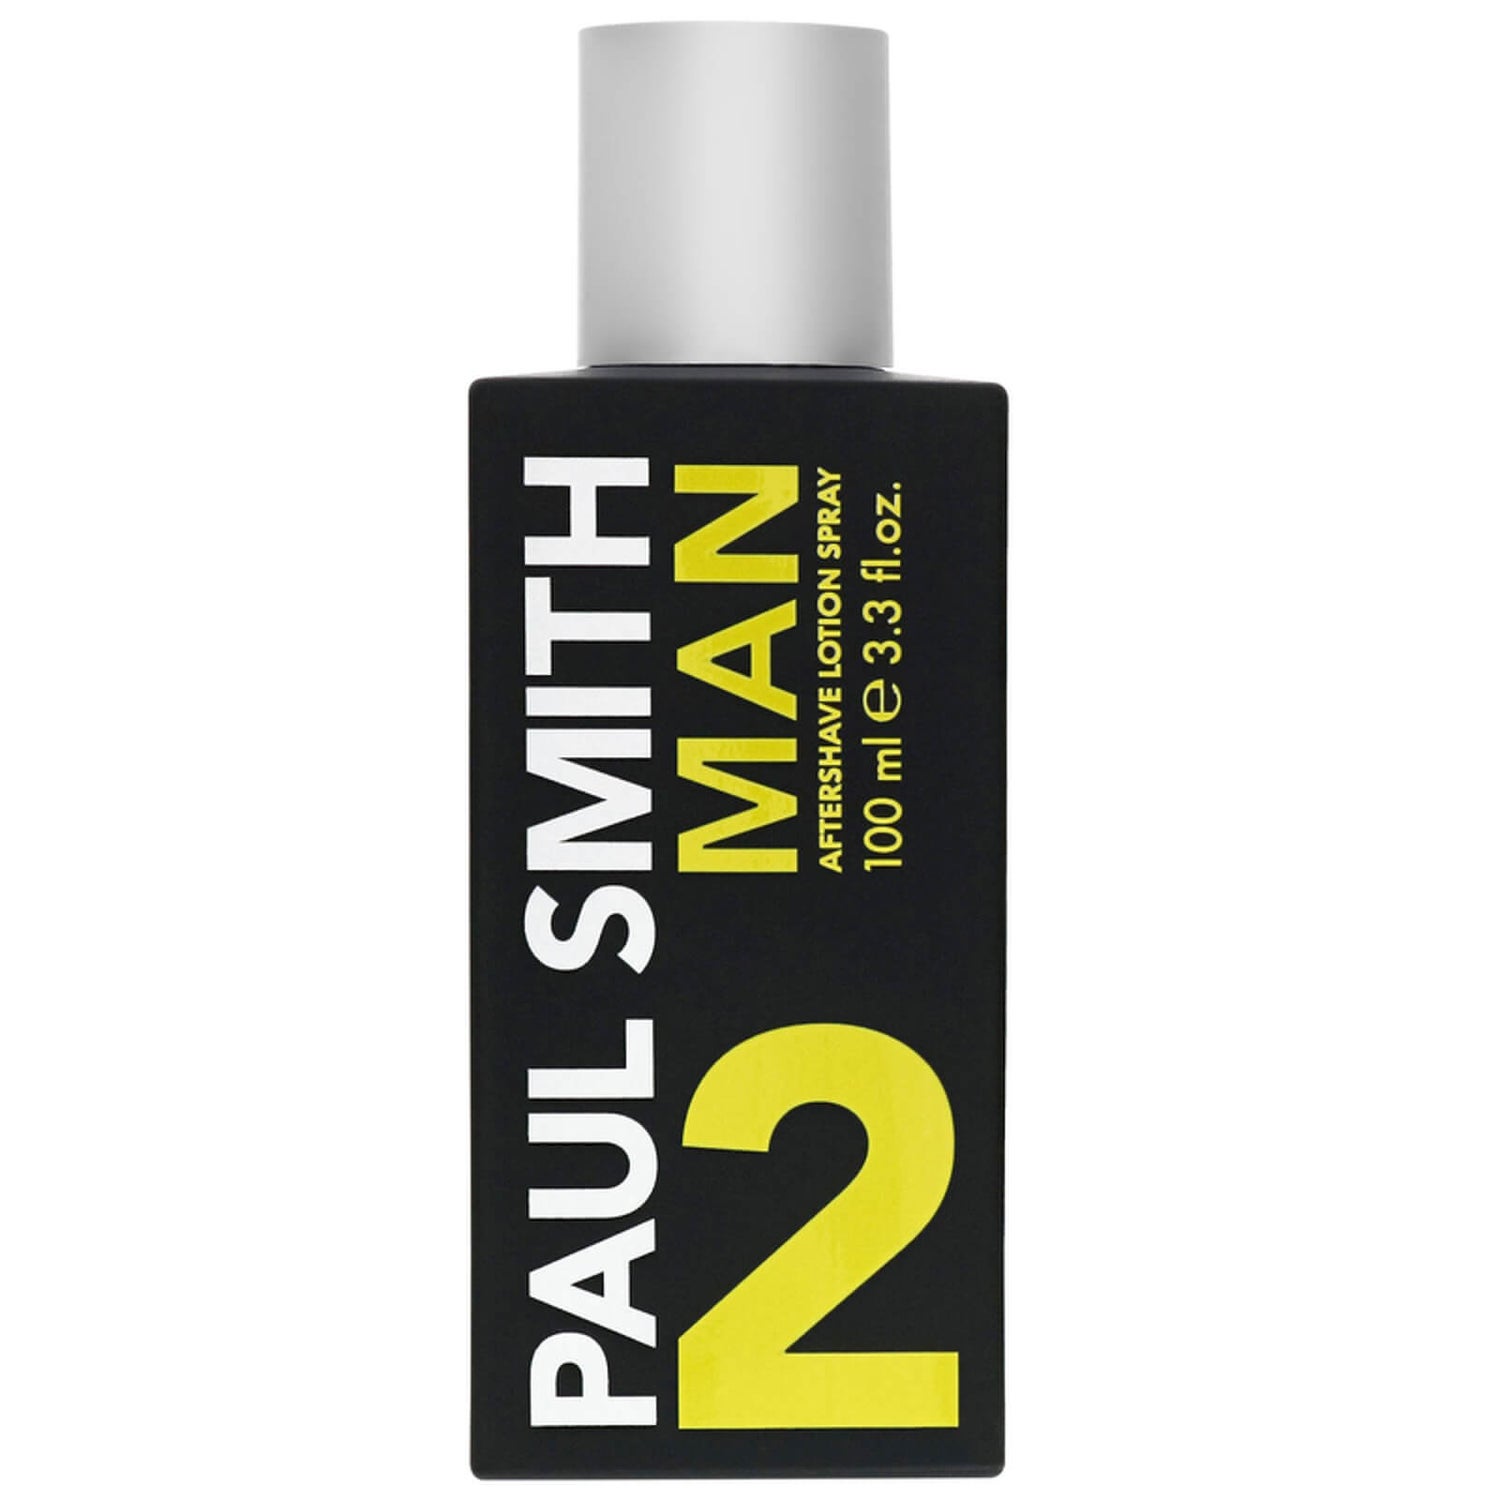 Paul Smith Man 2 Aftershave Spray | Direct